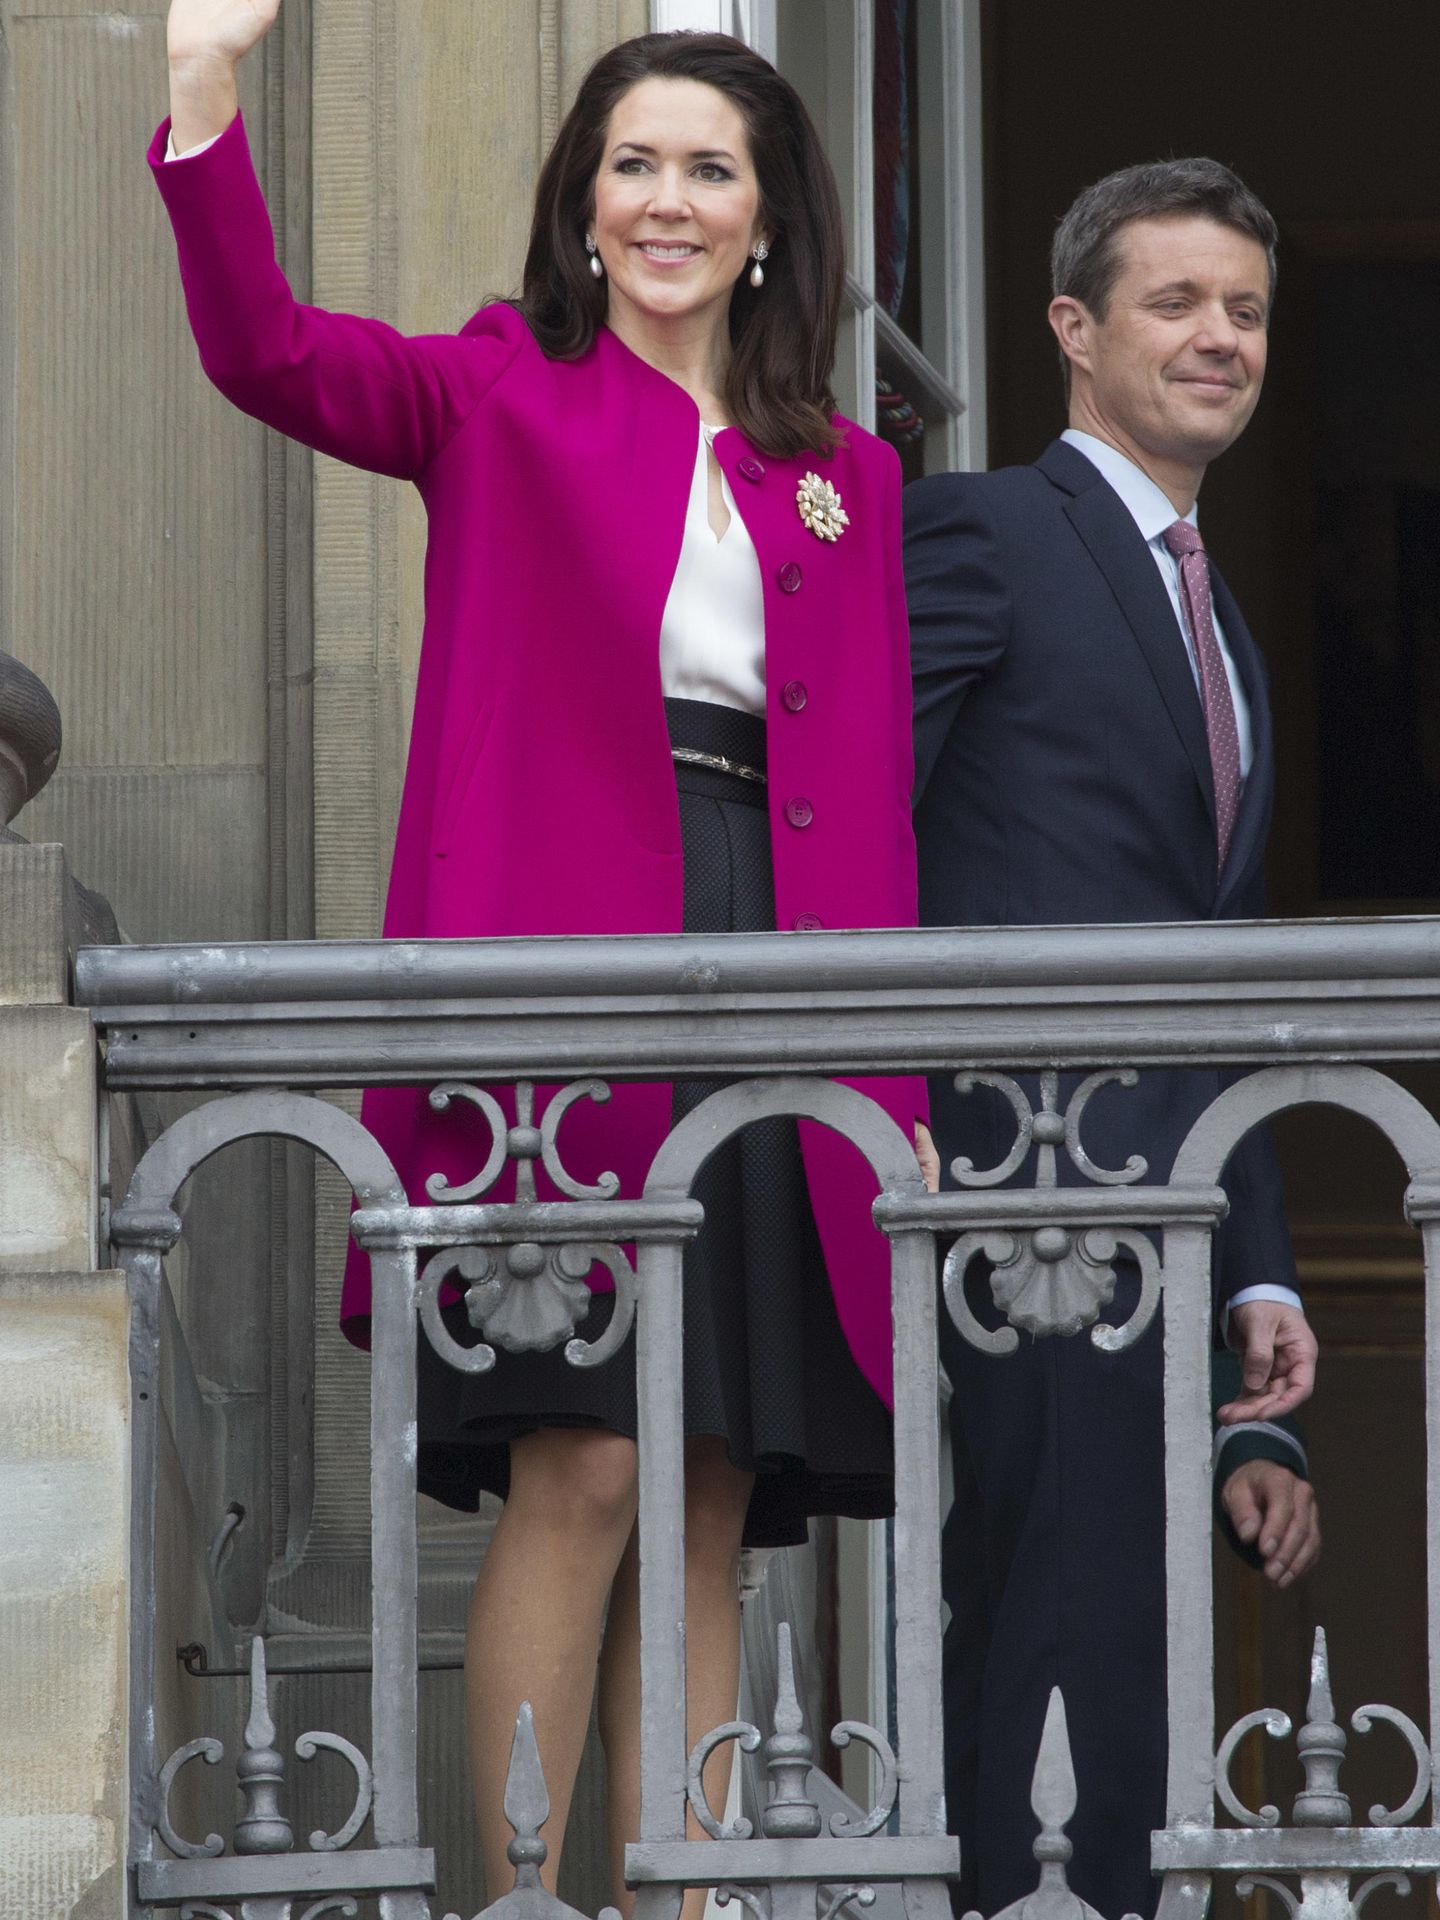 Crown Prince Frederik, Crown Princess Mary during the 76th birthday celebration of Queen Margrethe at the balcony of Amalienborg Palace, Denmark, 16 April 2016.